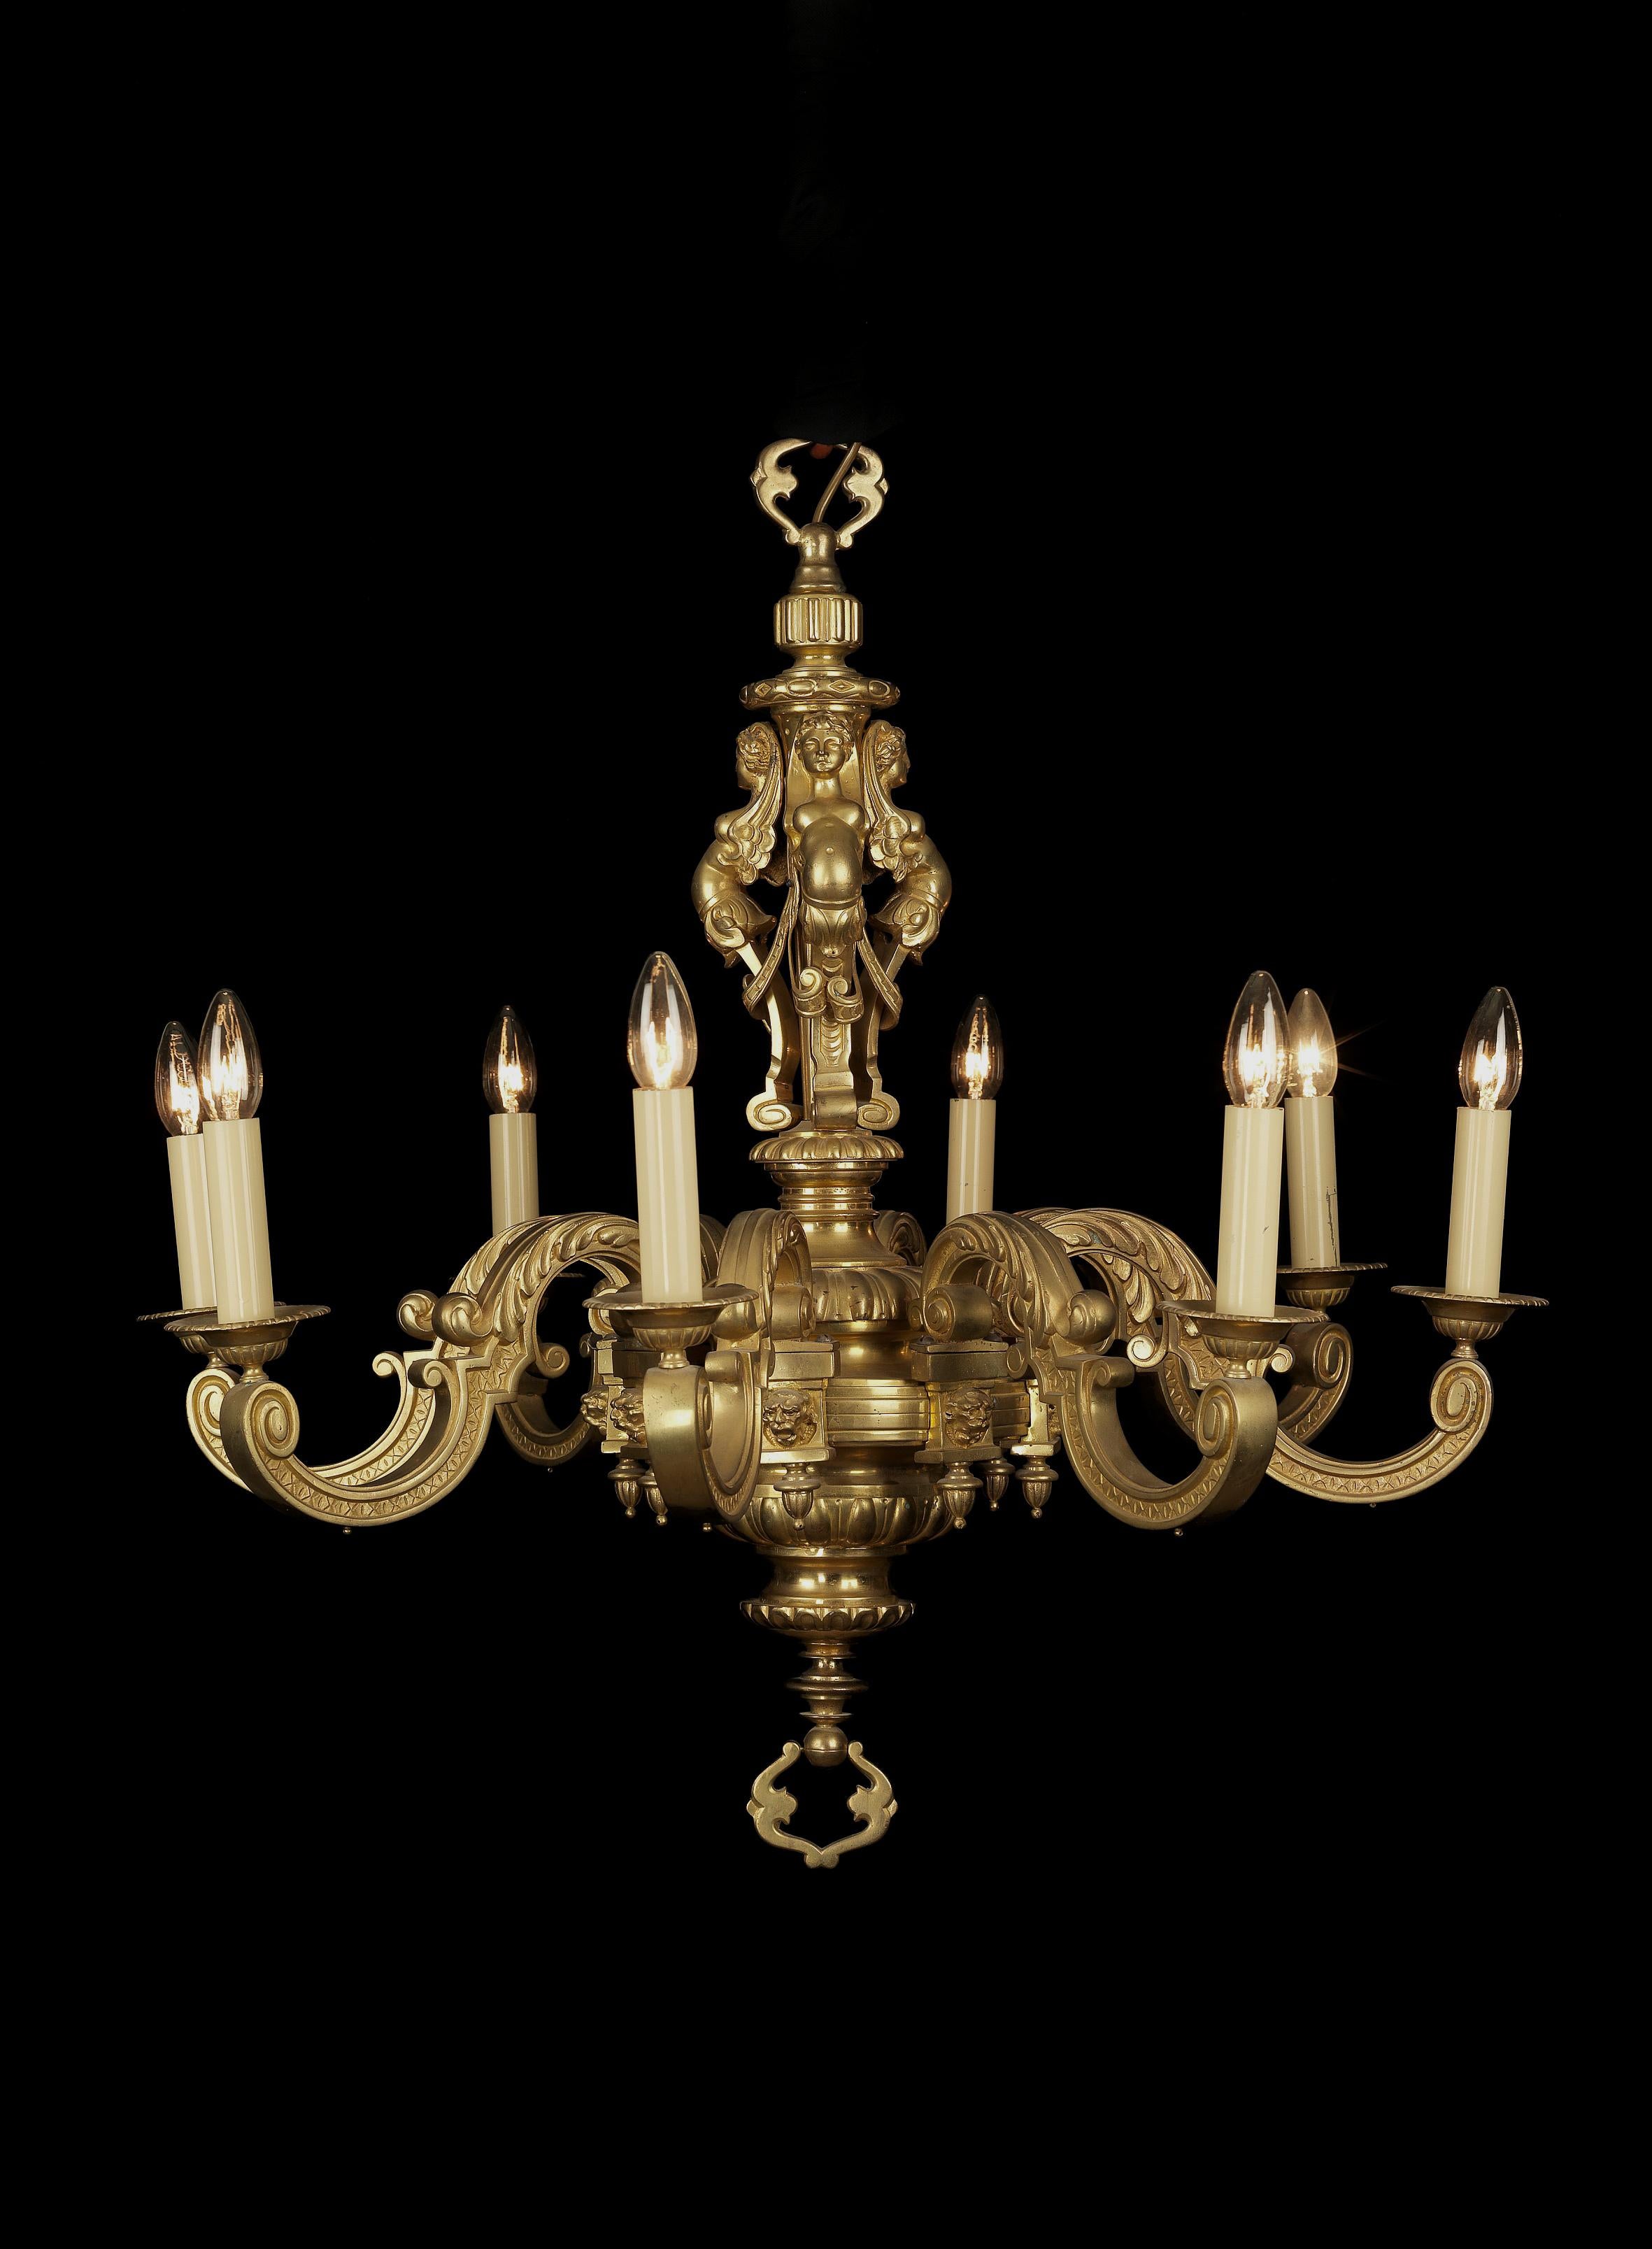 A fine gilt-bronze Louis XIV style eight-light chandelier.

A fine gilt-bronze Louis XIV style eight-light chandelier with acanthus cast candle arms. Each arm is depicted with a grotesque mask and the stem finely cast with three winged